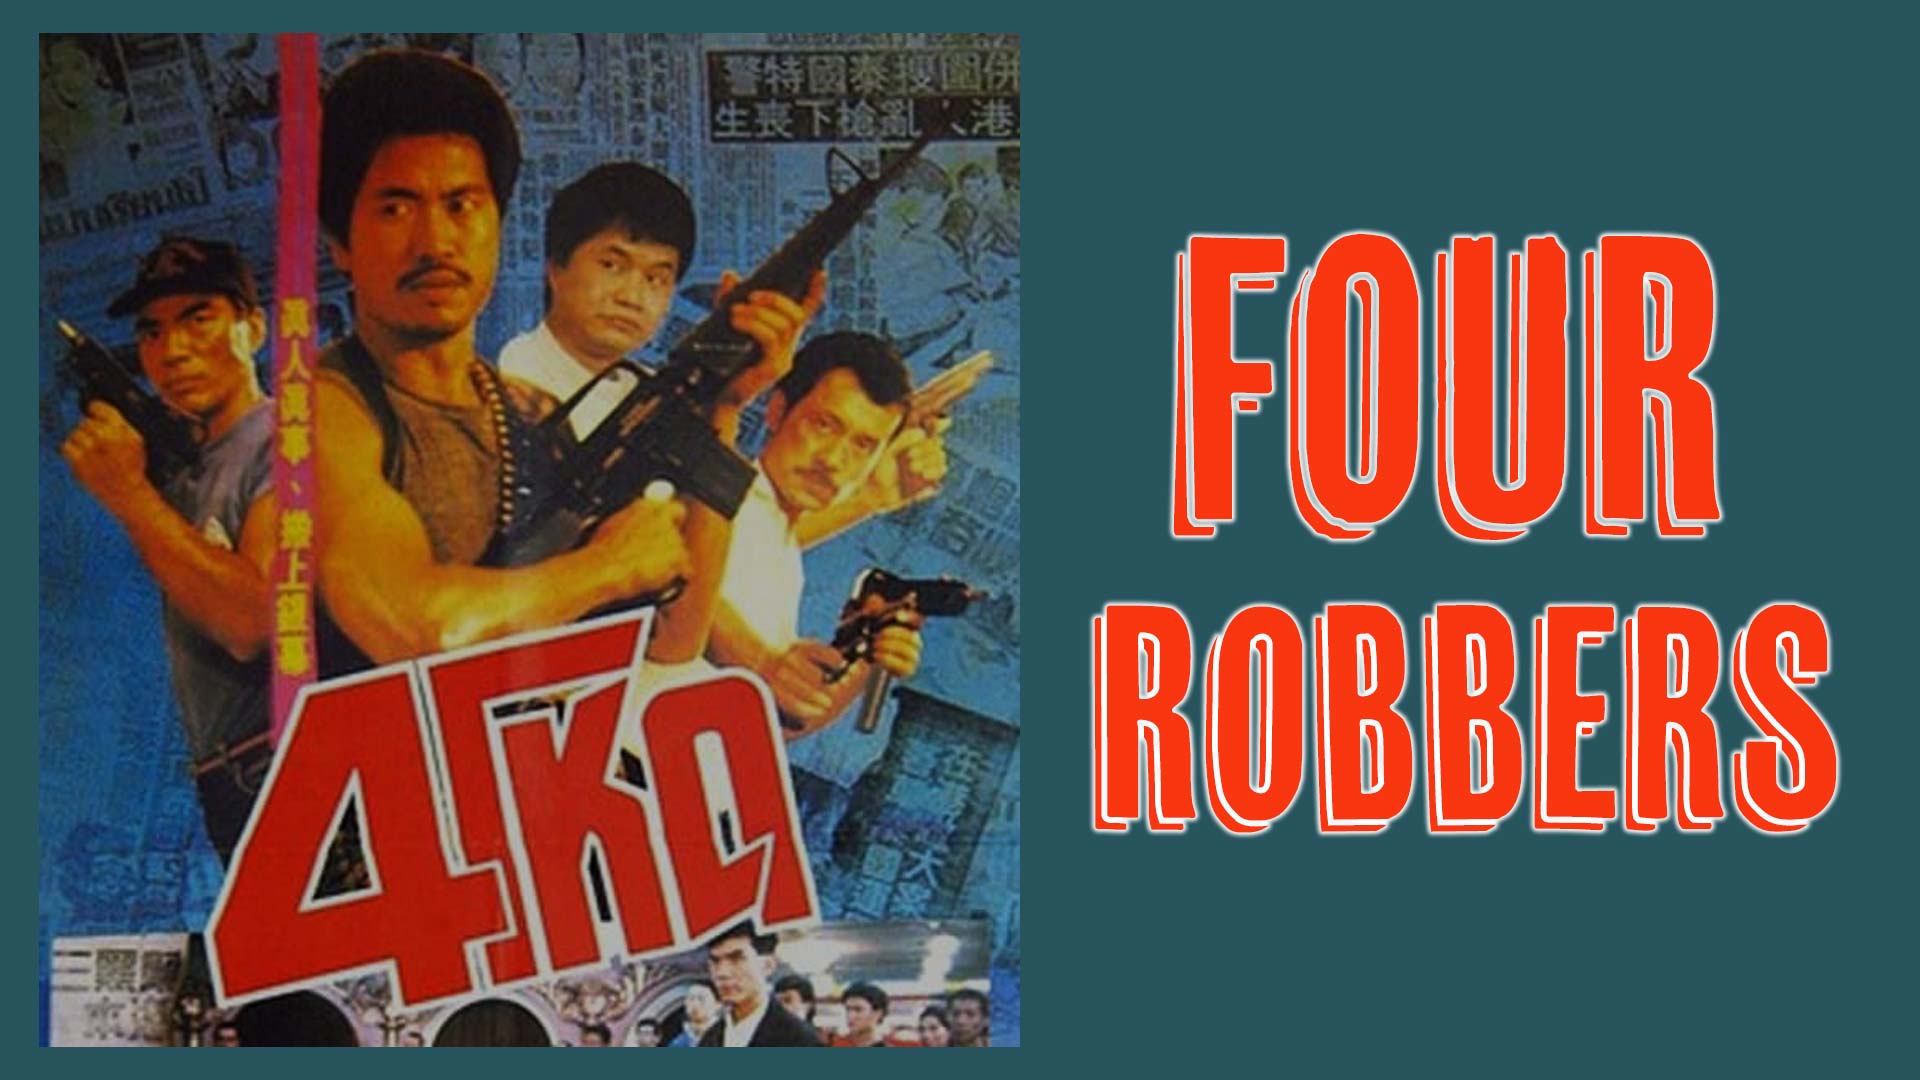 Four Robbers